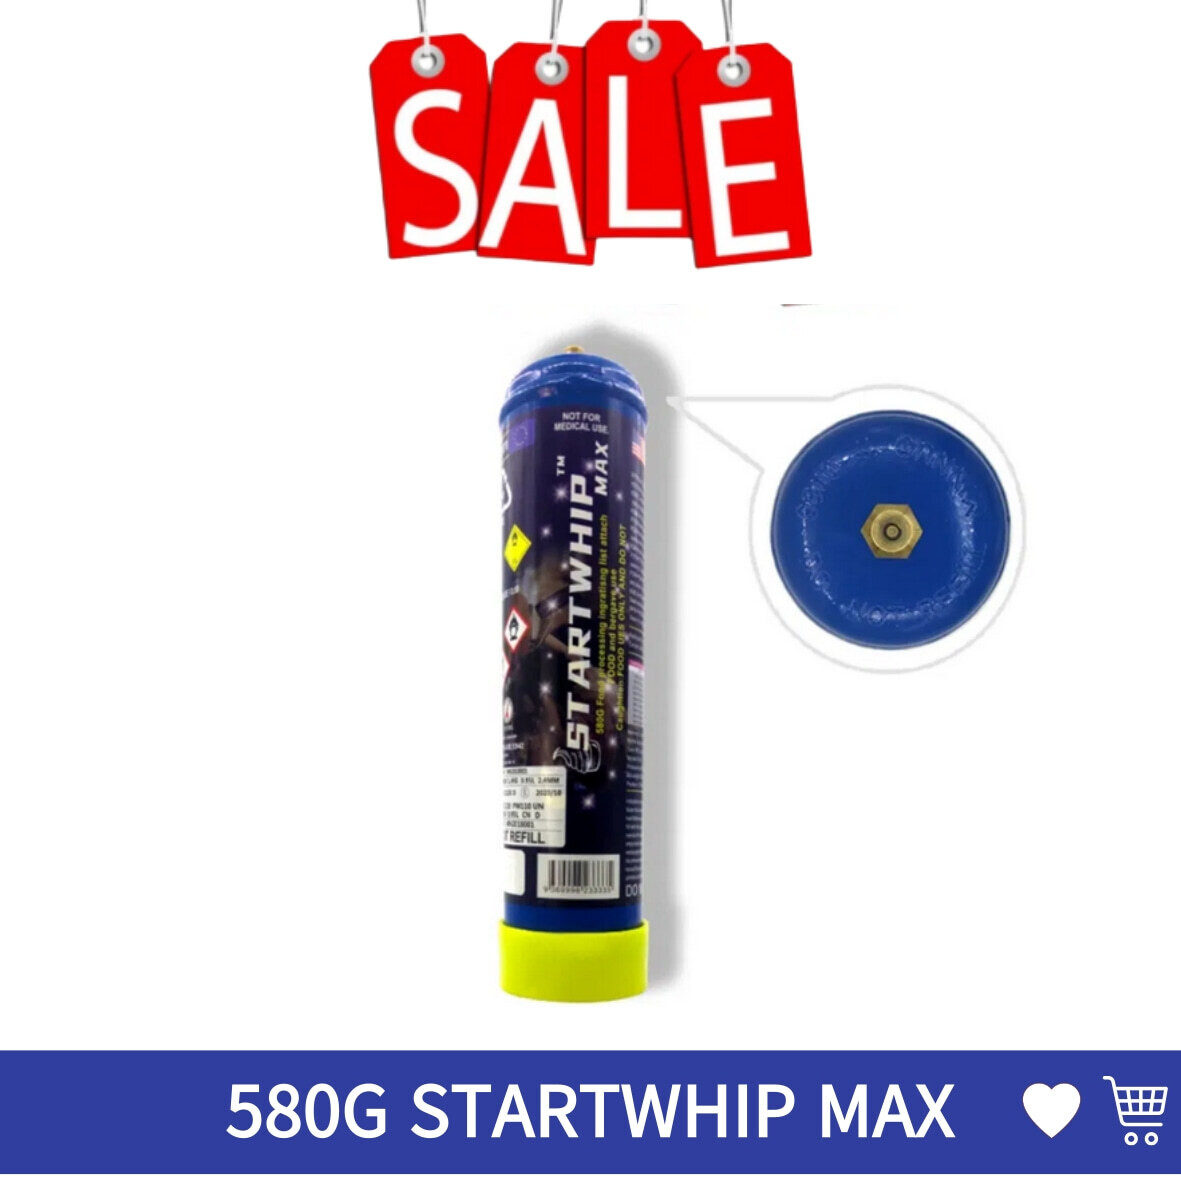 Cream Chargers: 580g Cylinder Startwhip Max + Pressure Release Nozzle